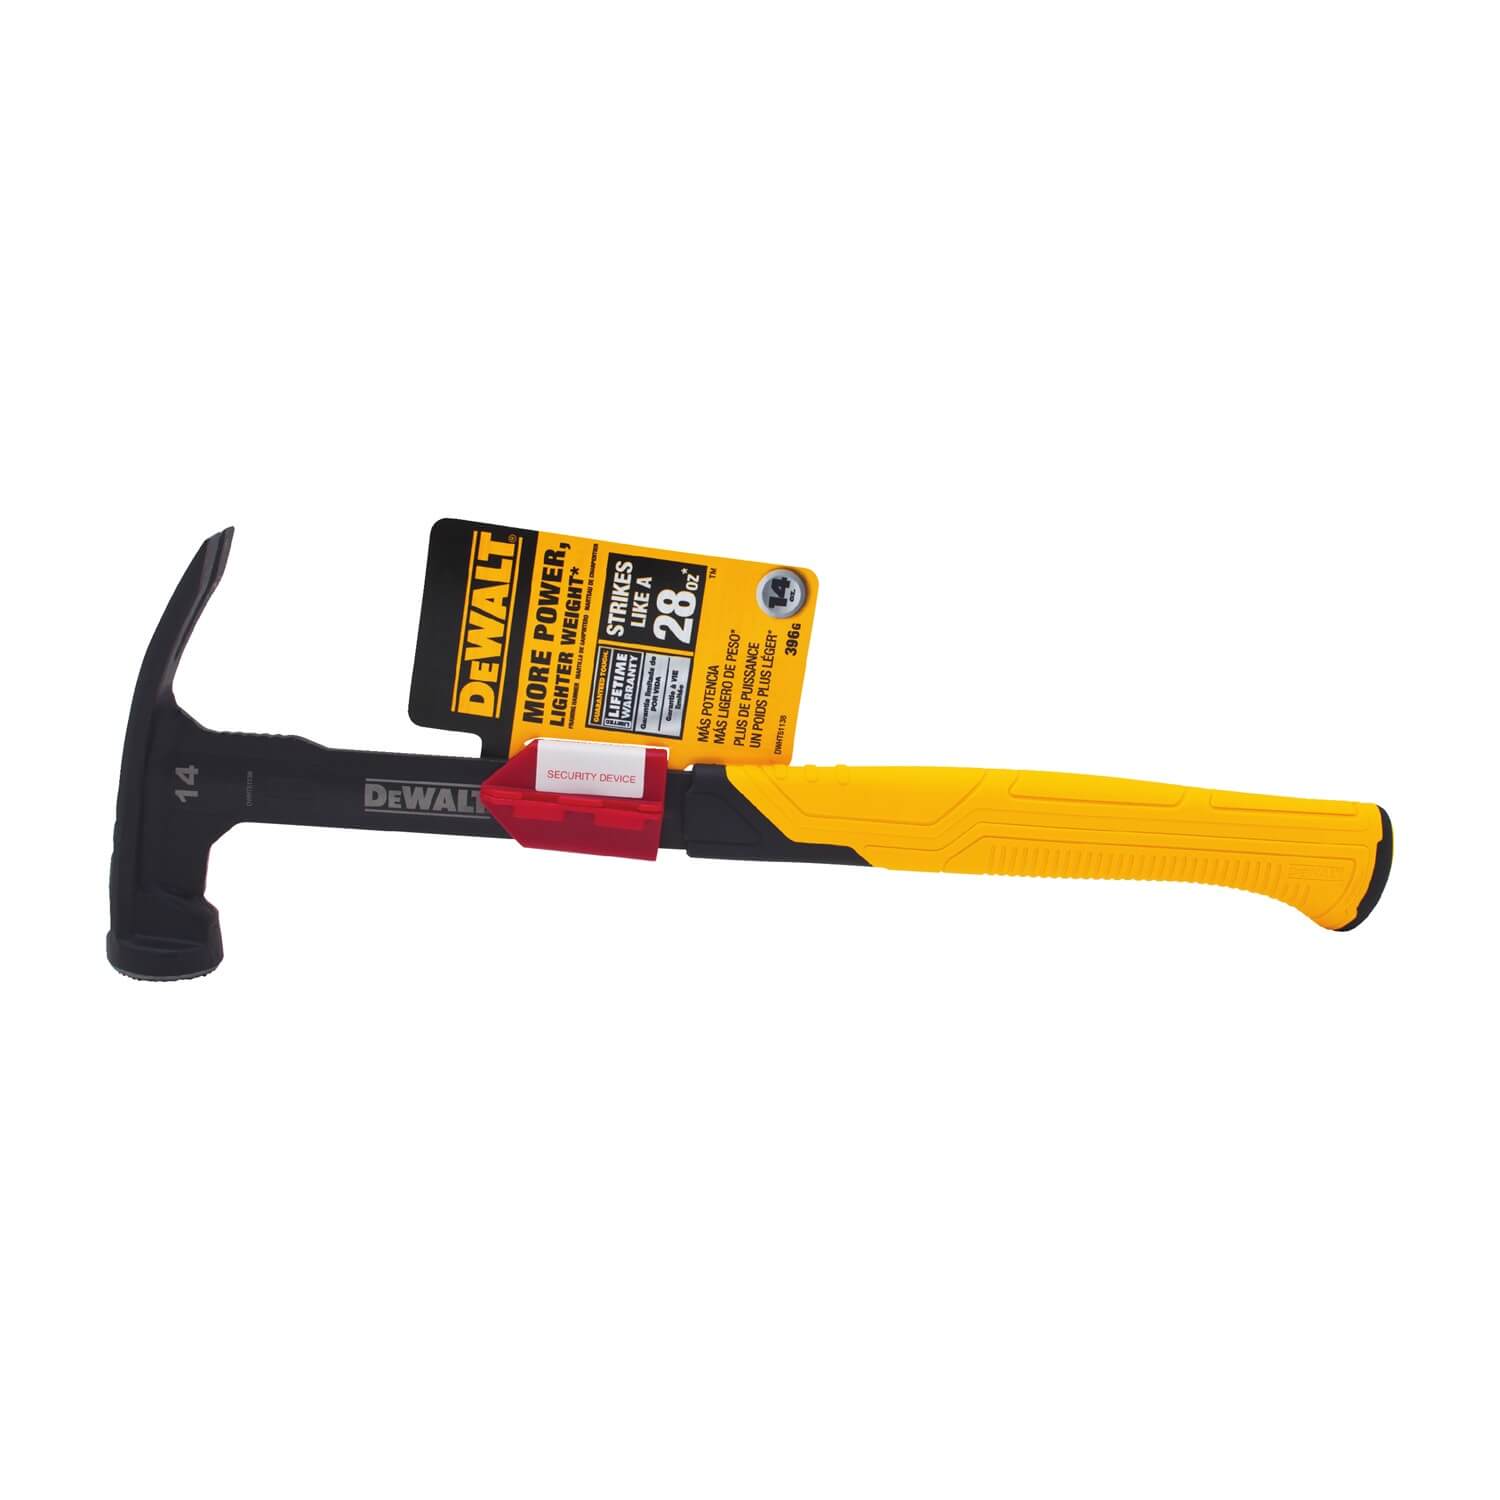 DEWALT DWHT51138 Mig Weld Checkered Framing Nailing Hammer - wise-line-tools